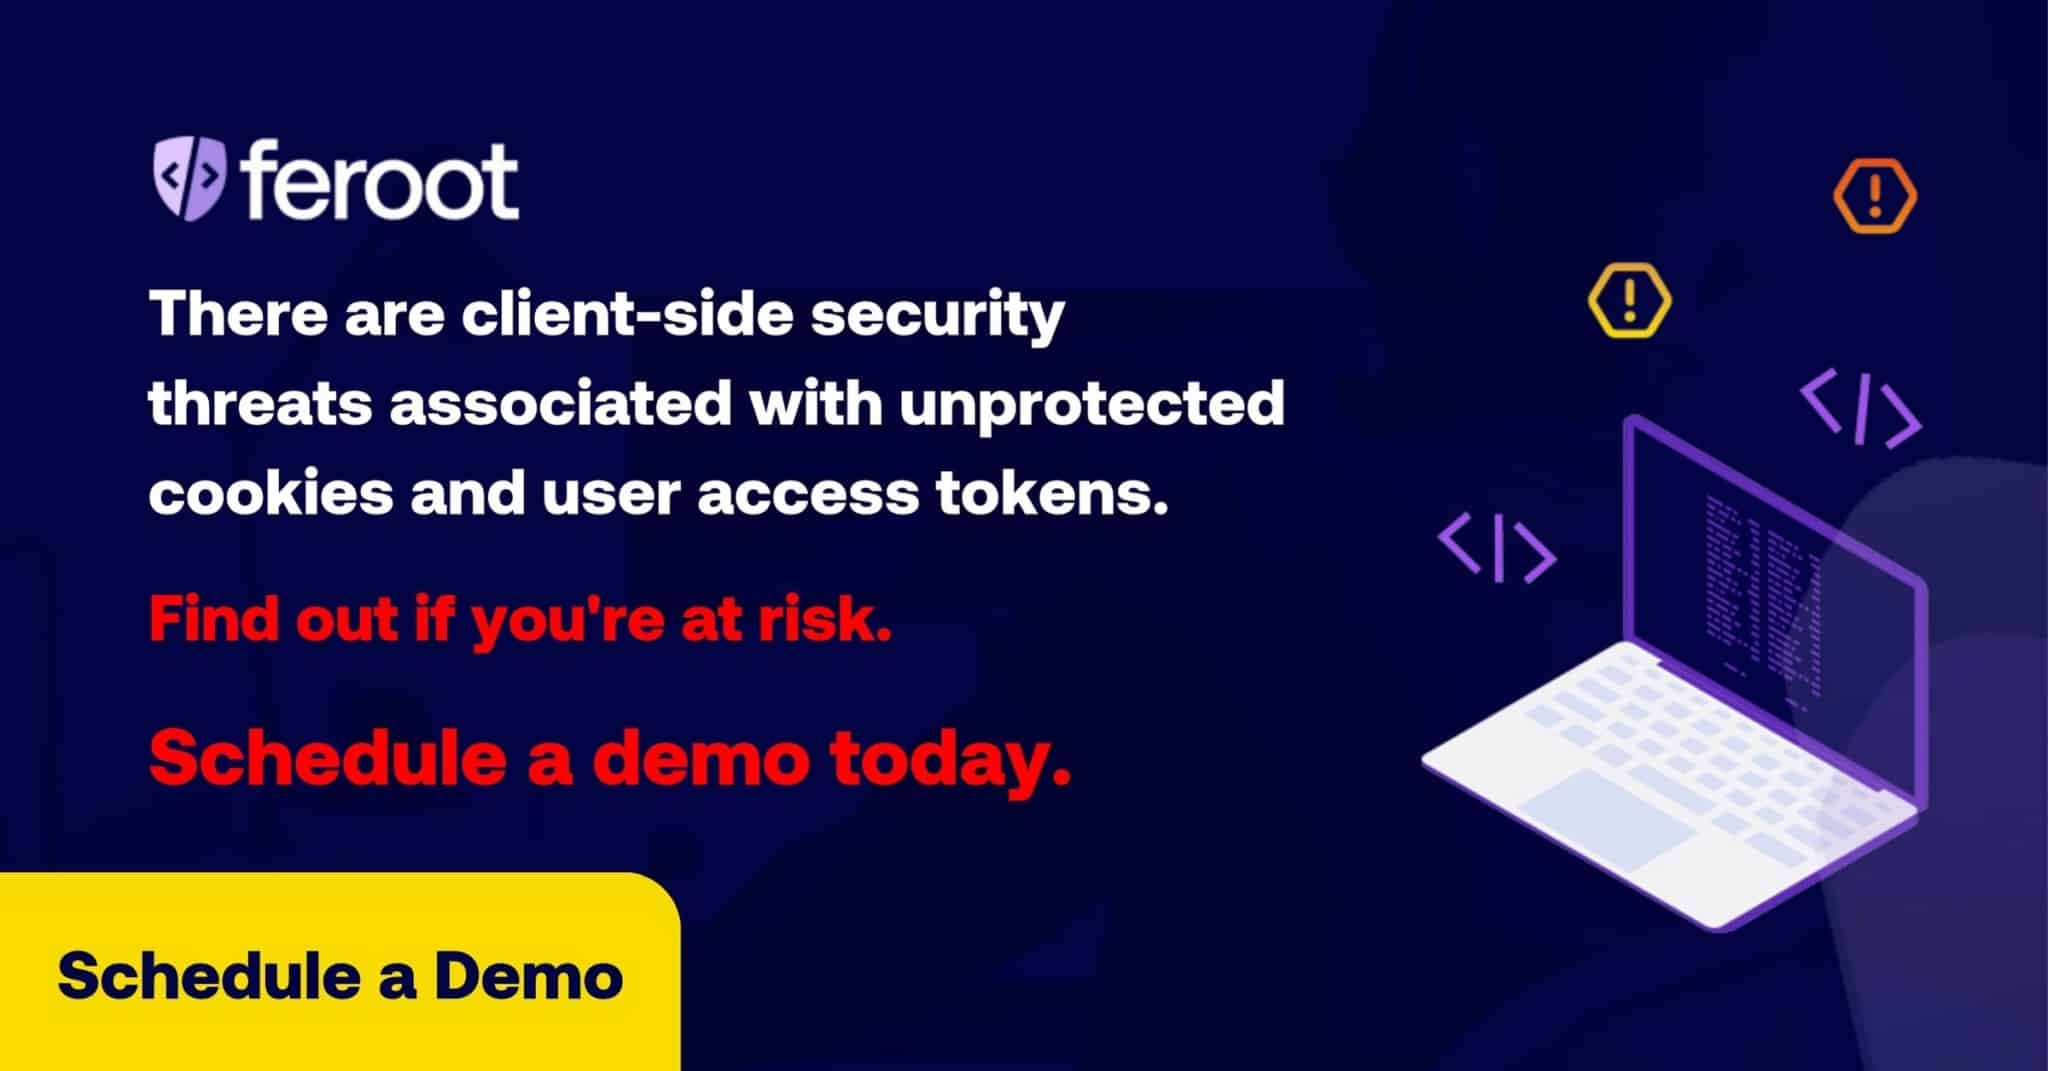 There are client-side security threats associated with unprotected cookies and user access tokens. Find out if you're at risk. Schedule a demo today. Schedule a demo.